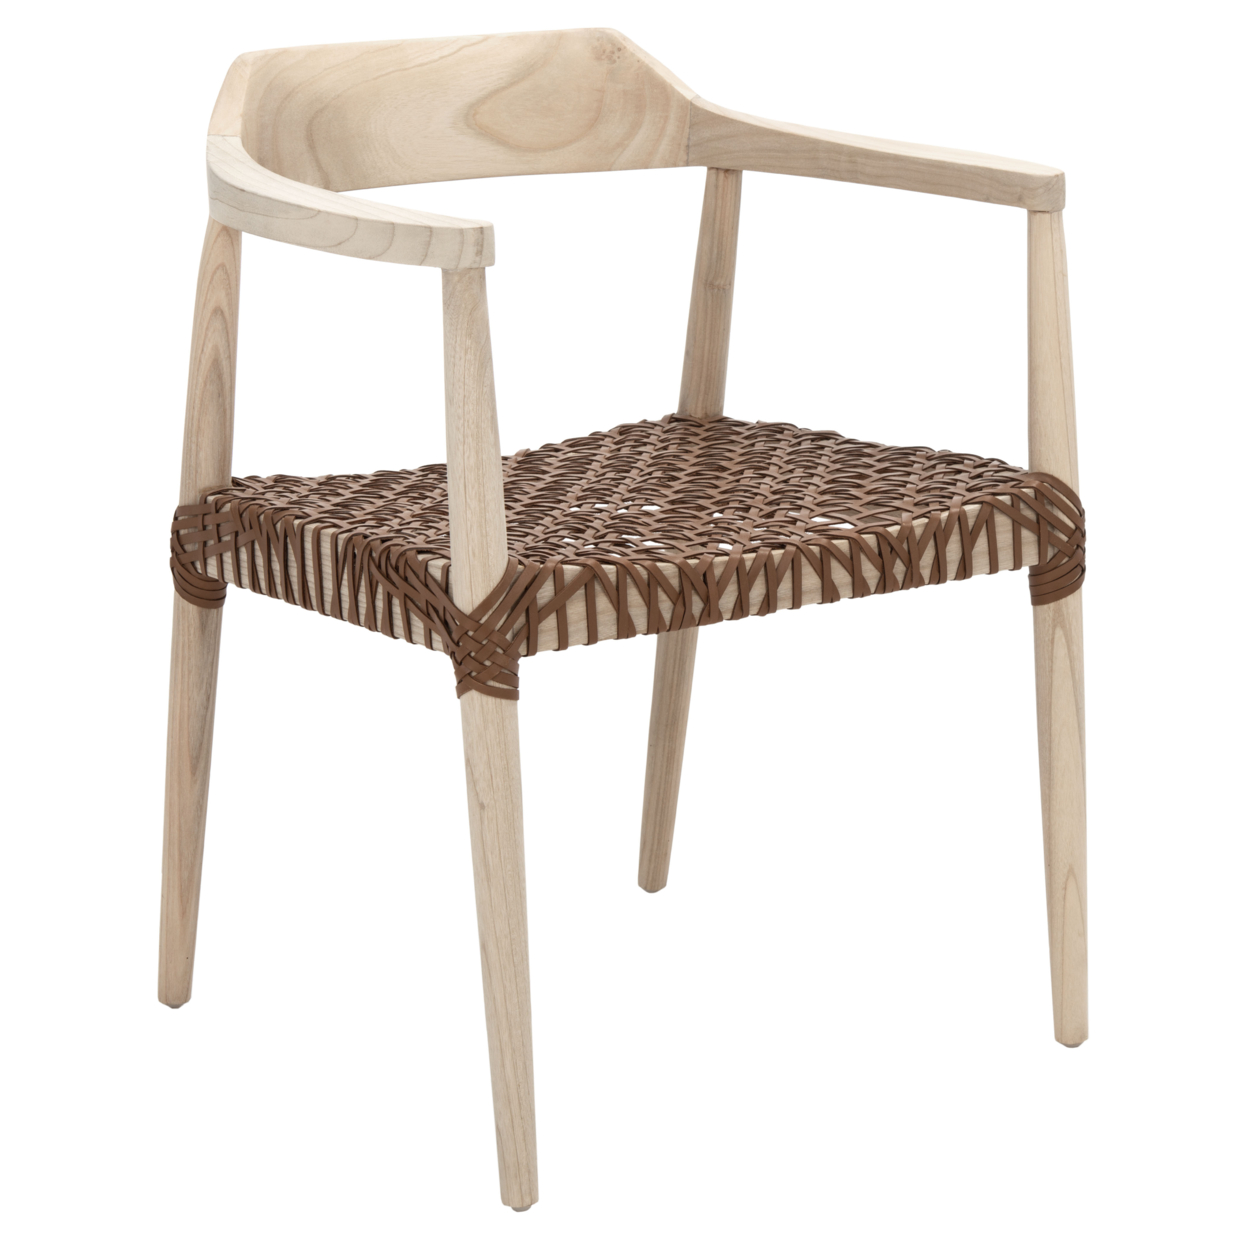 SAFAVIEH Munro Leather Woven Accent Chair Natural / Light Honey